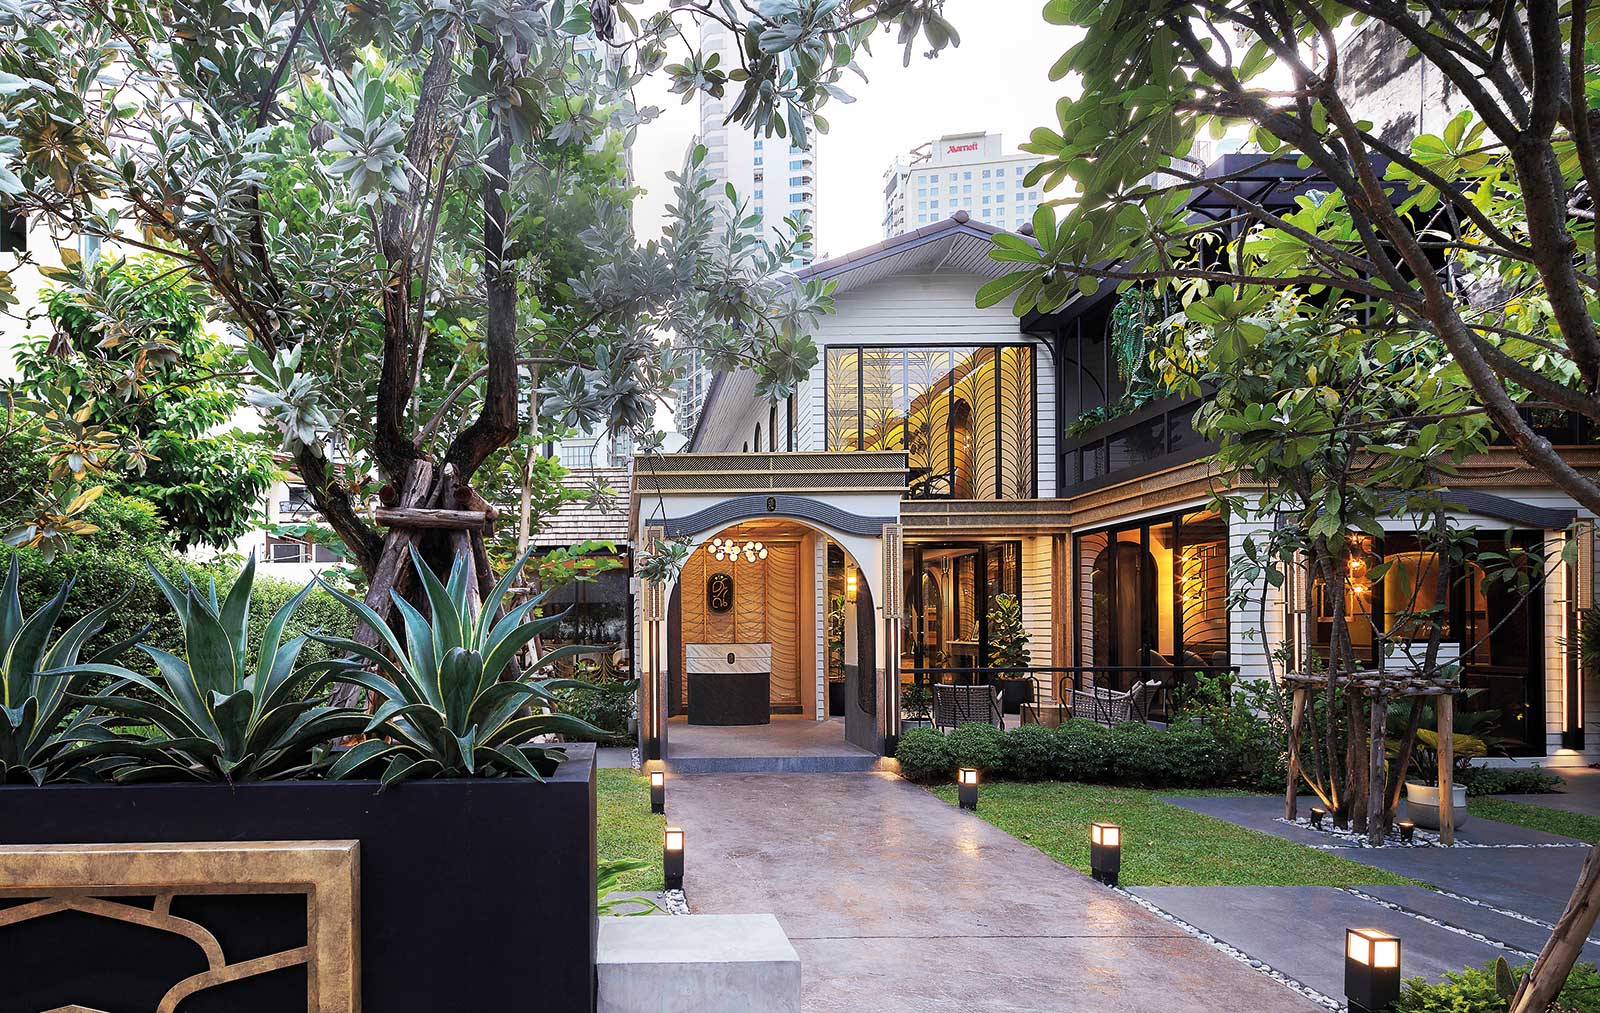 The courtyard at Sorn Restaurant in Bangkok, one of Asia's great foodie cities